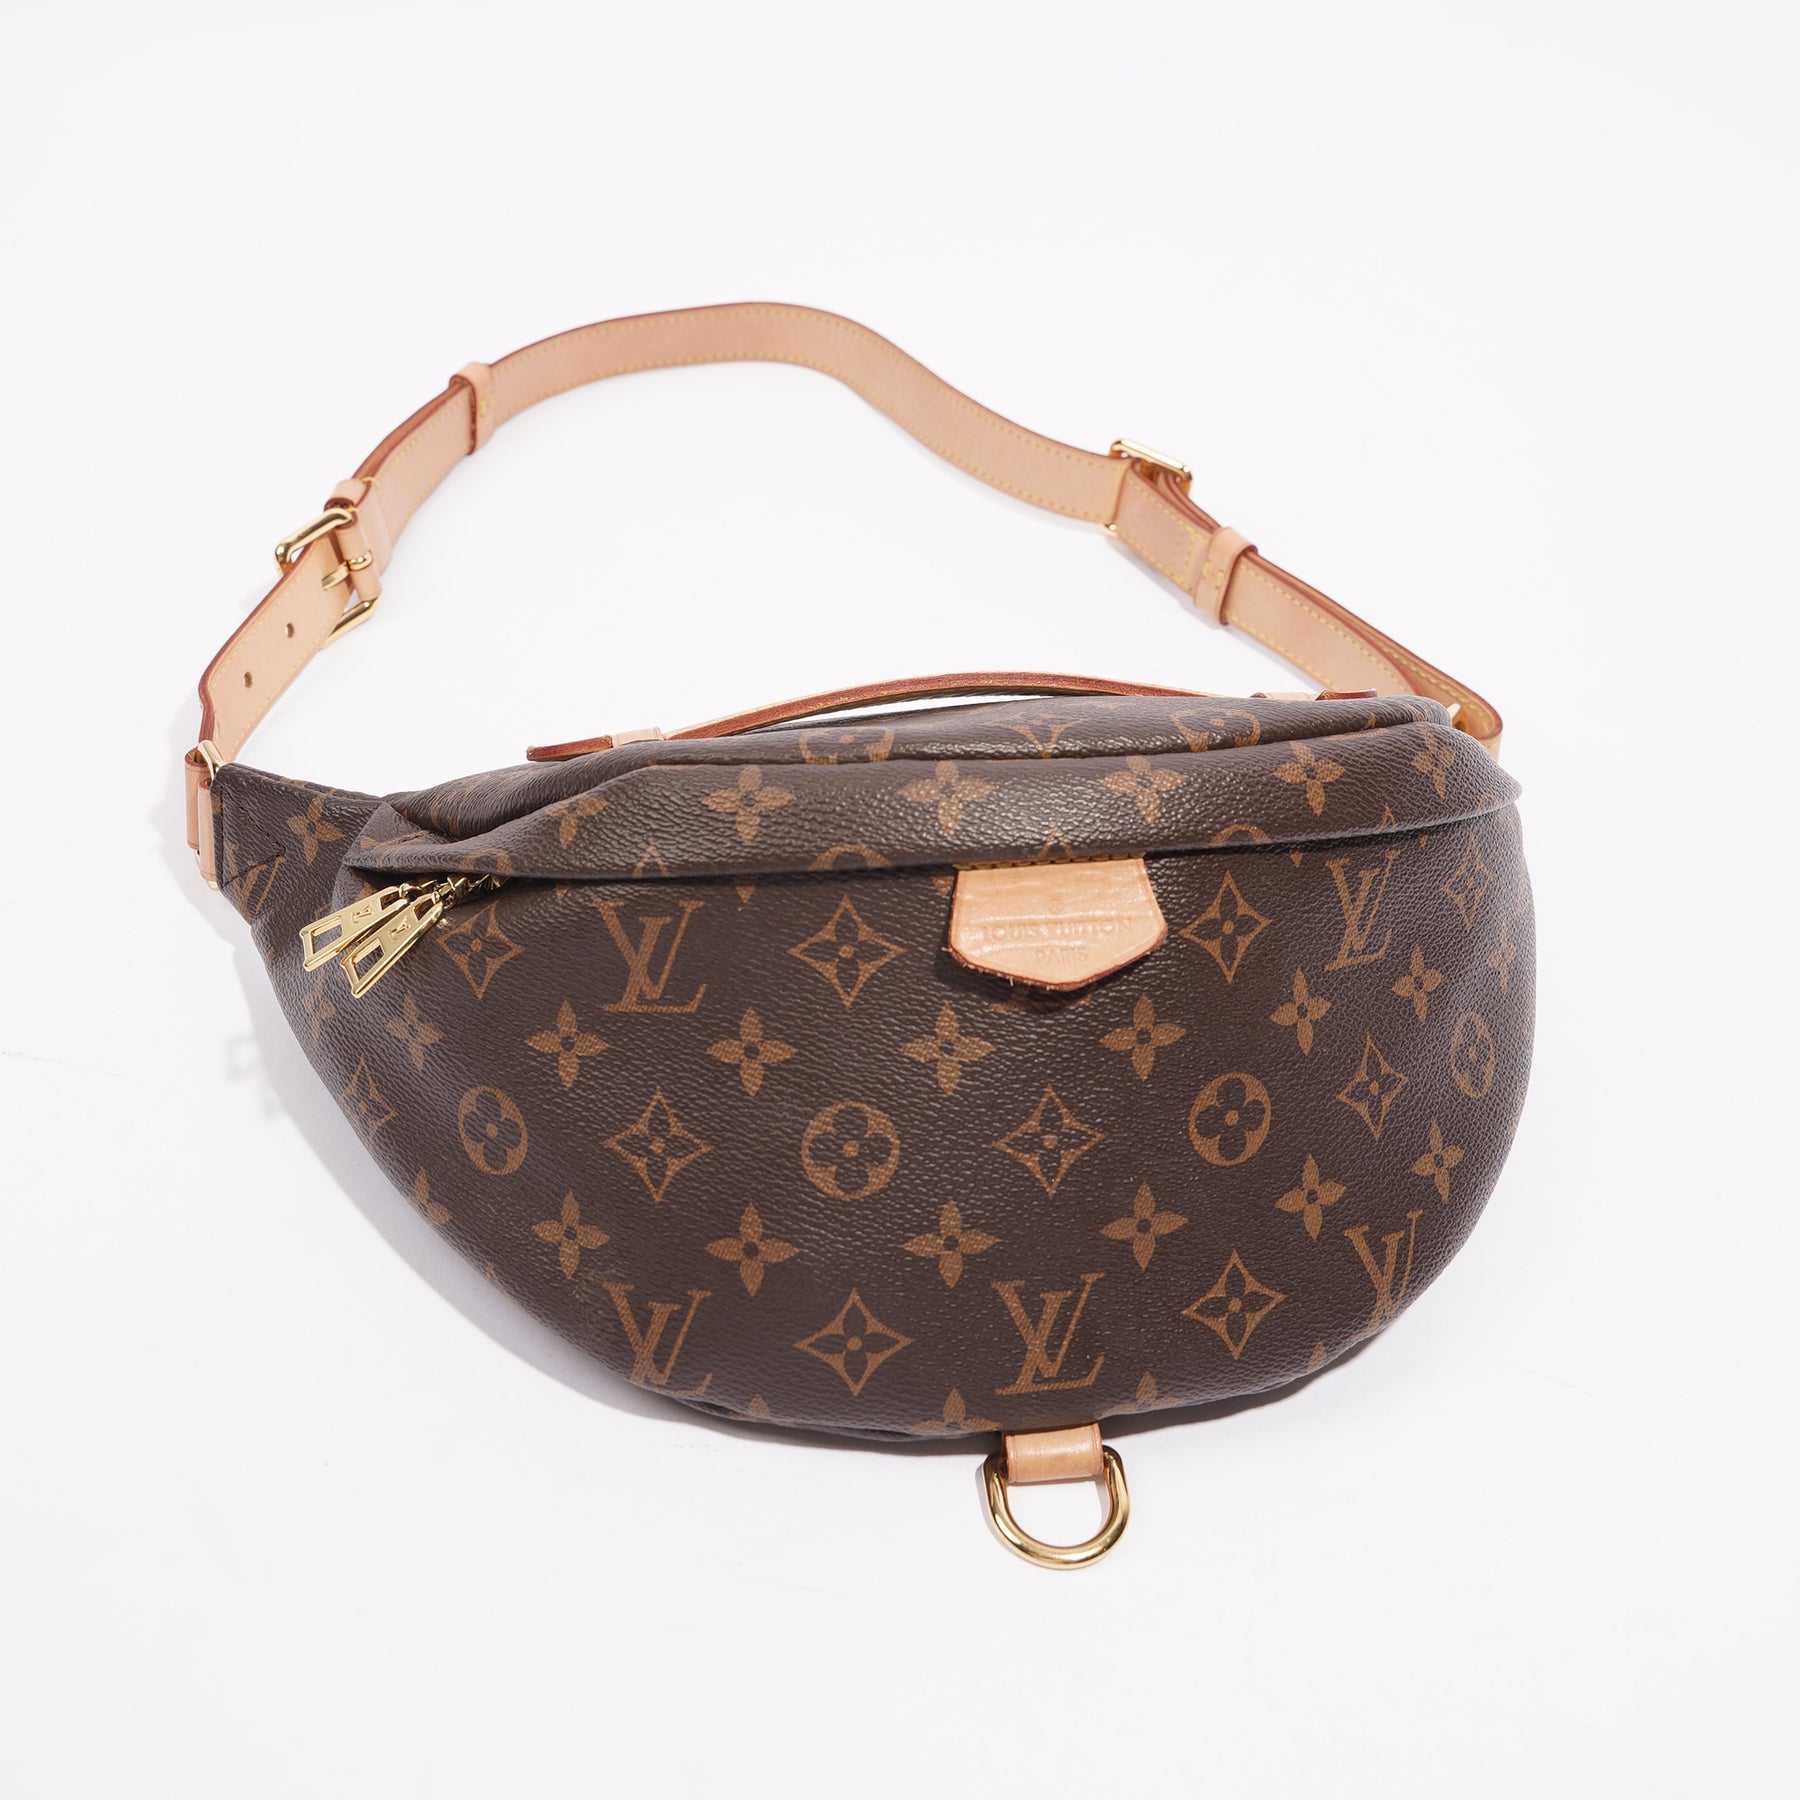 REVIEW: ALL ABOUT THE Louis Vuitton CANNES BAG 2019 (REVERSE MONOGRAM) 